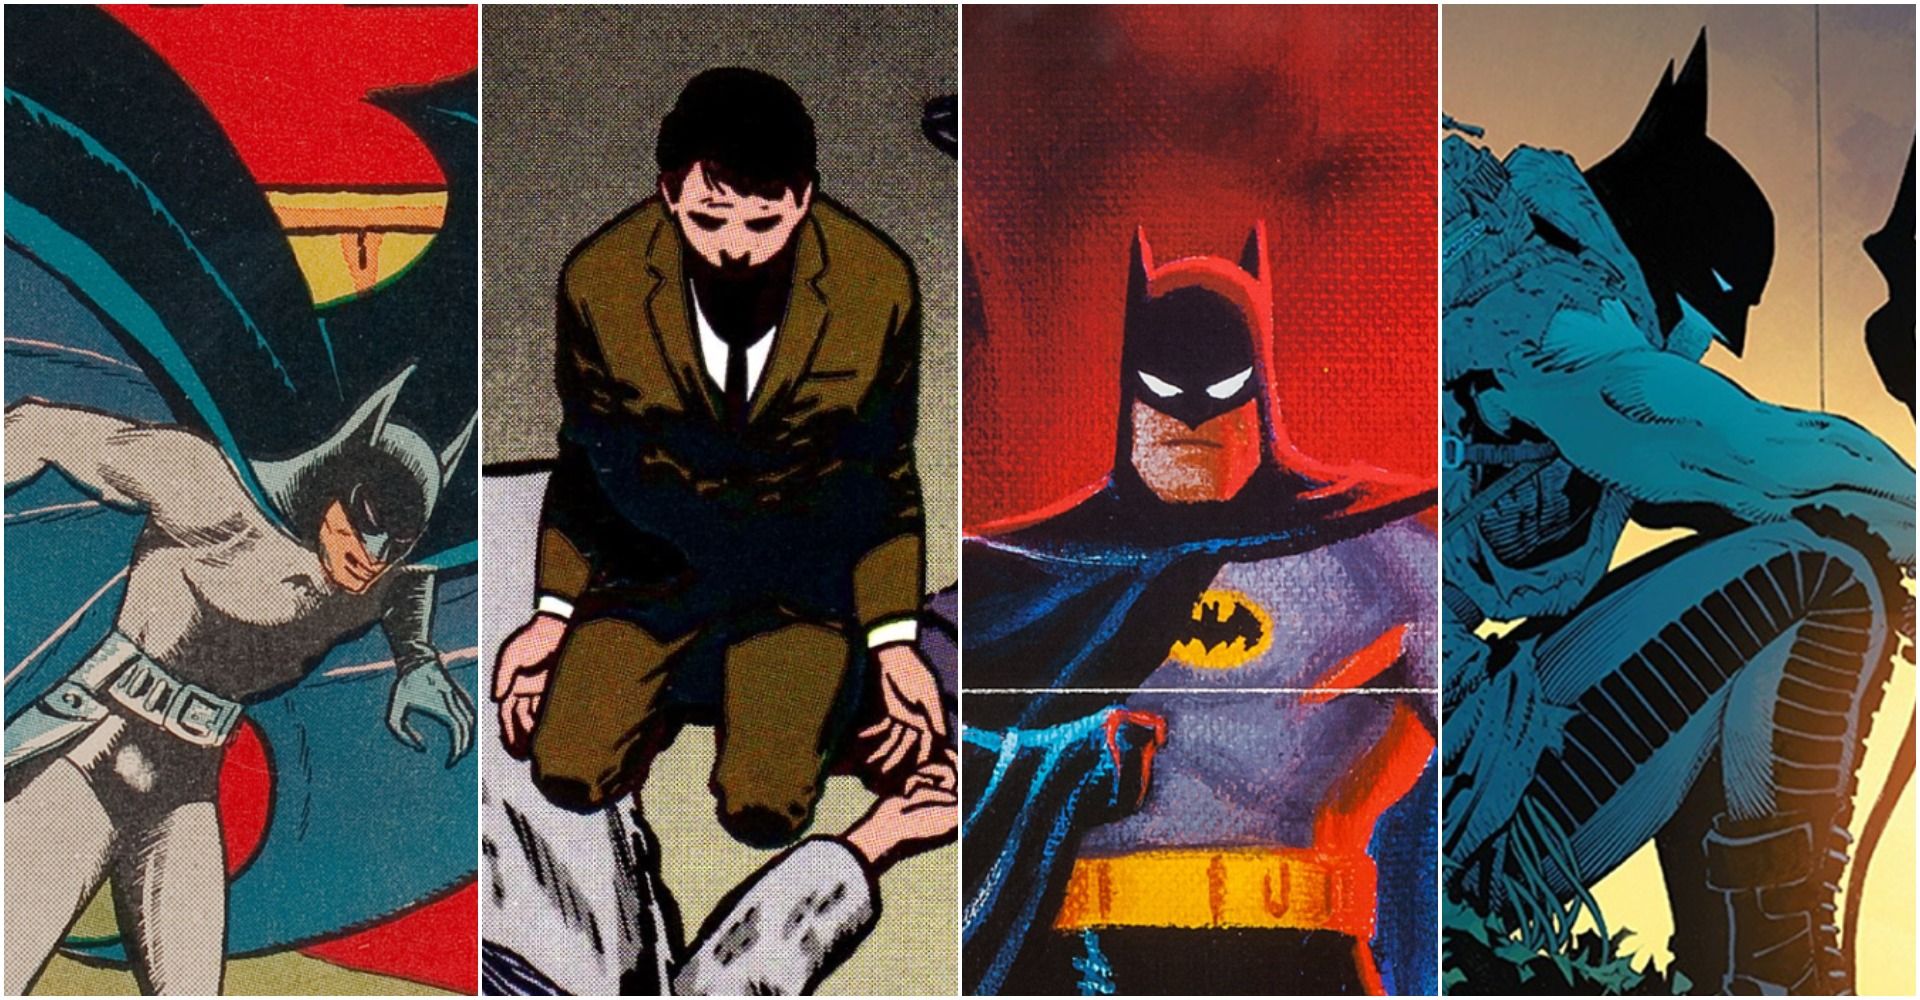 Batman: All Of His Origin Stories In The Comics (In Chronological Order)